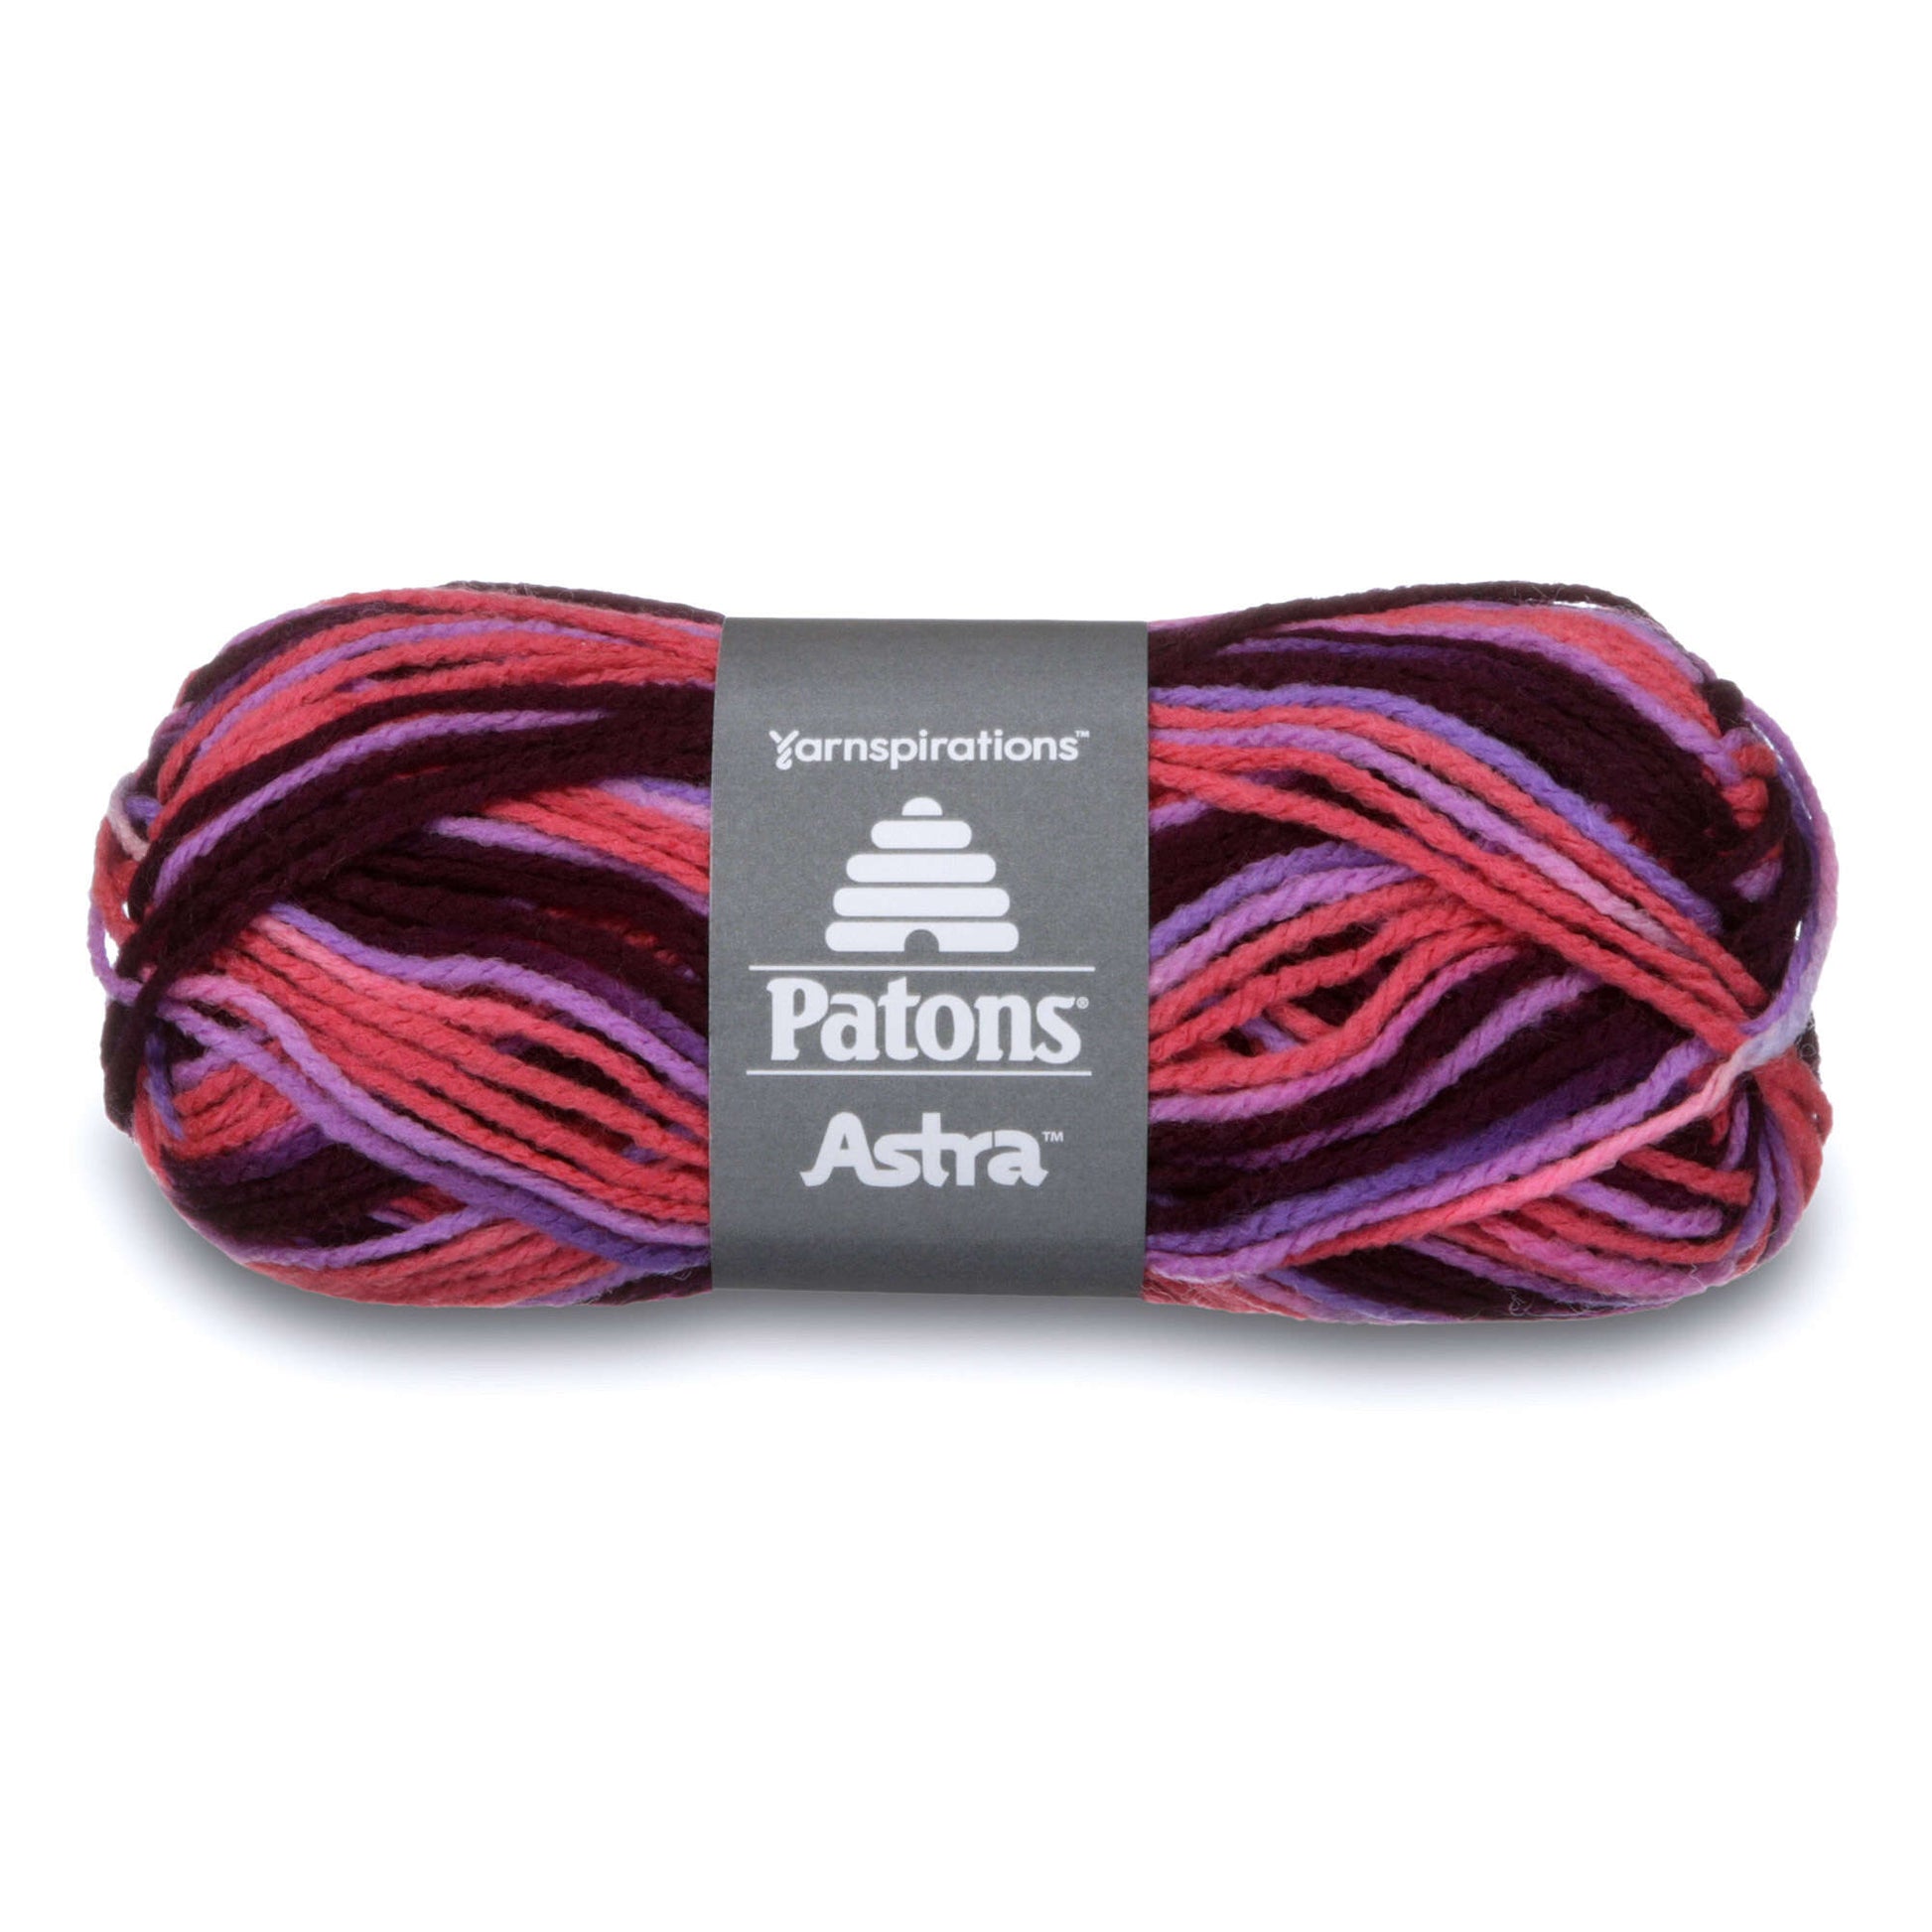 Patons Astra Variegates Yarn - Discontinued Shades All That Girl Variegated